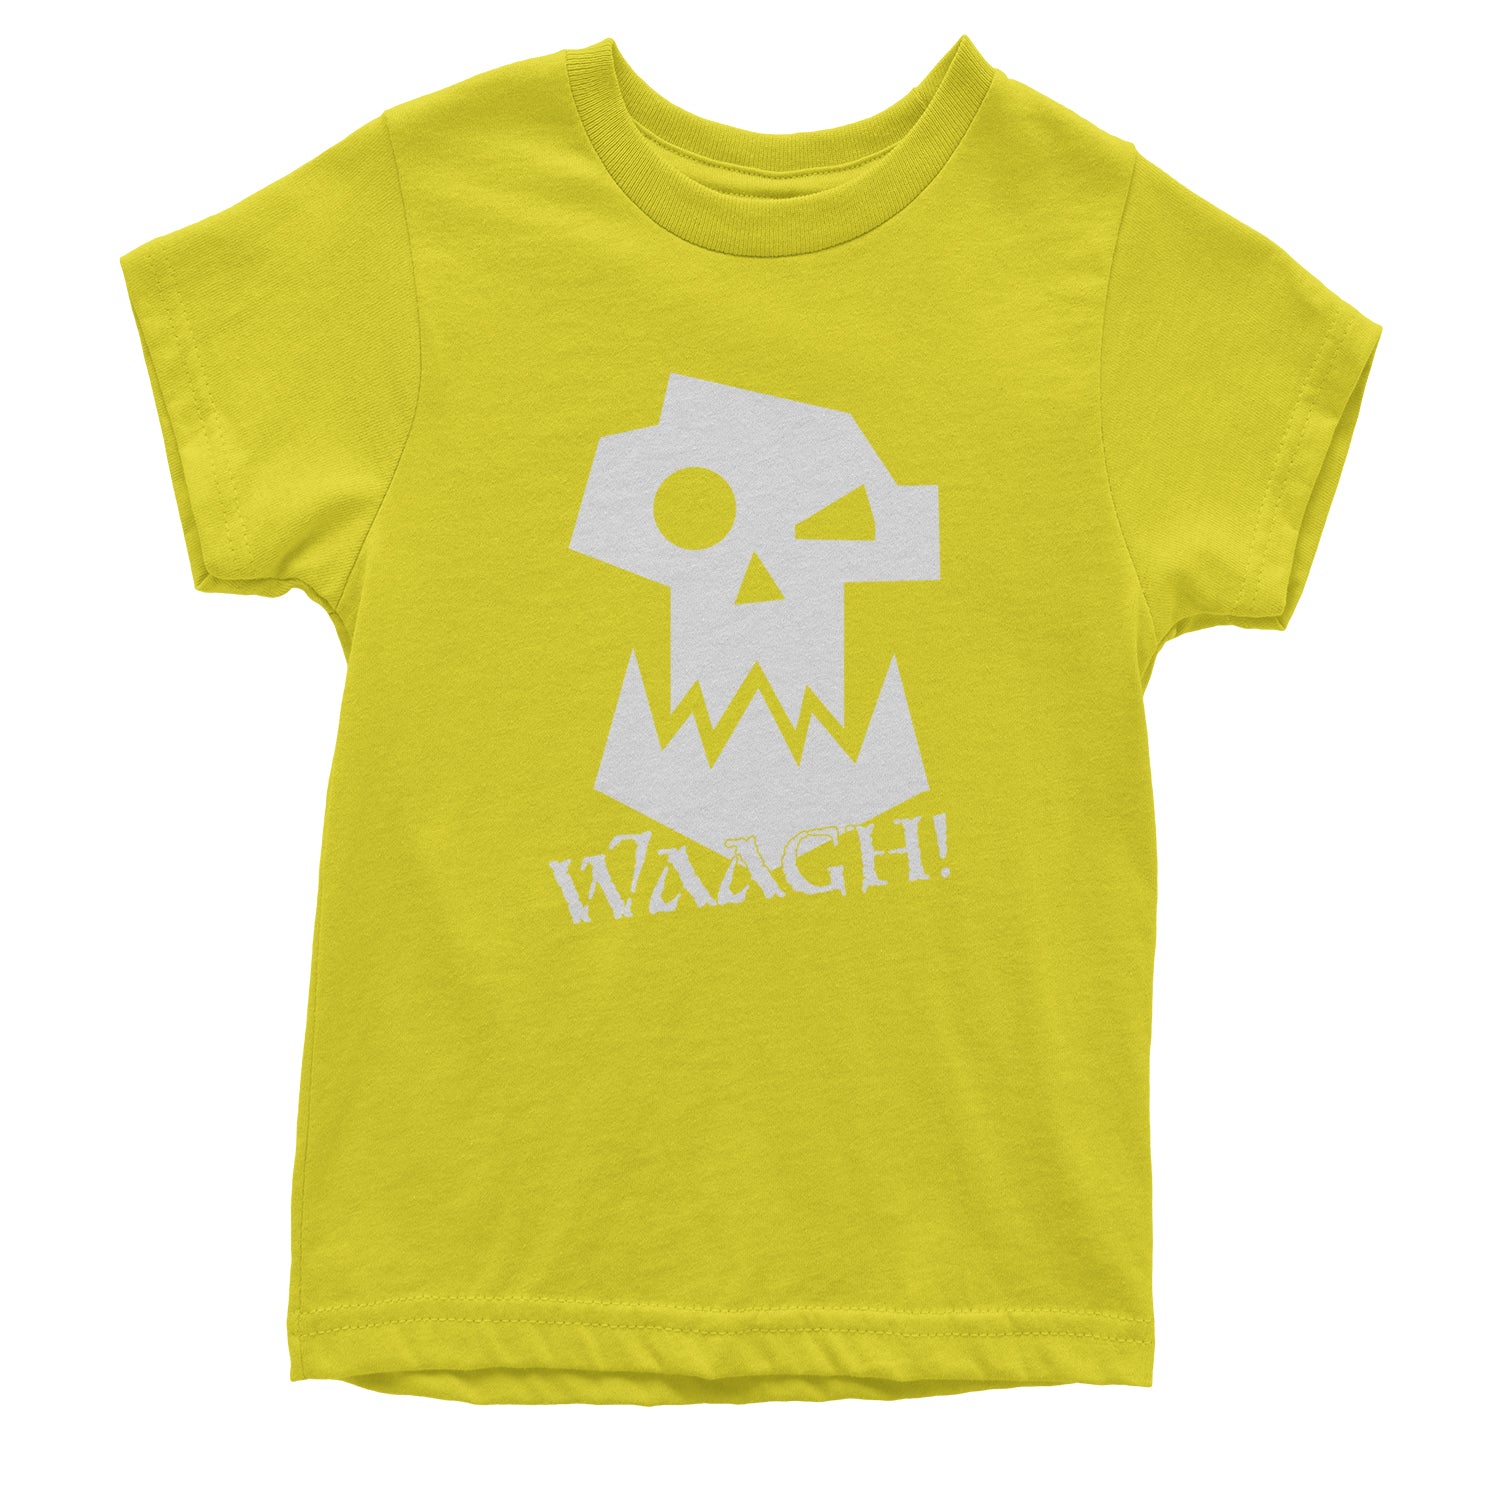 Ork Miniature Tabletop Wargaming Waagh Youth T-shirt #expressiontees by Expression Tees